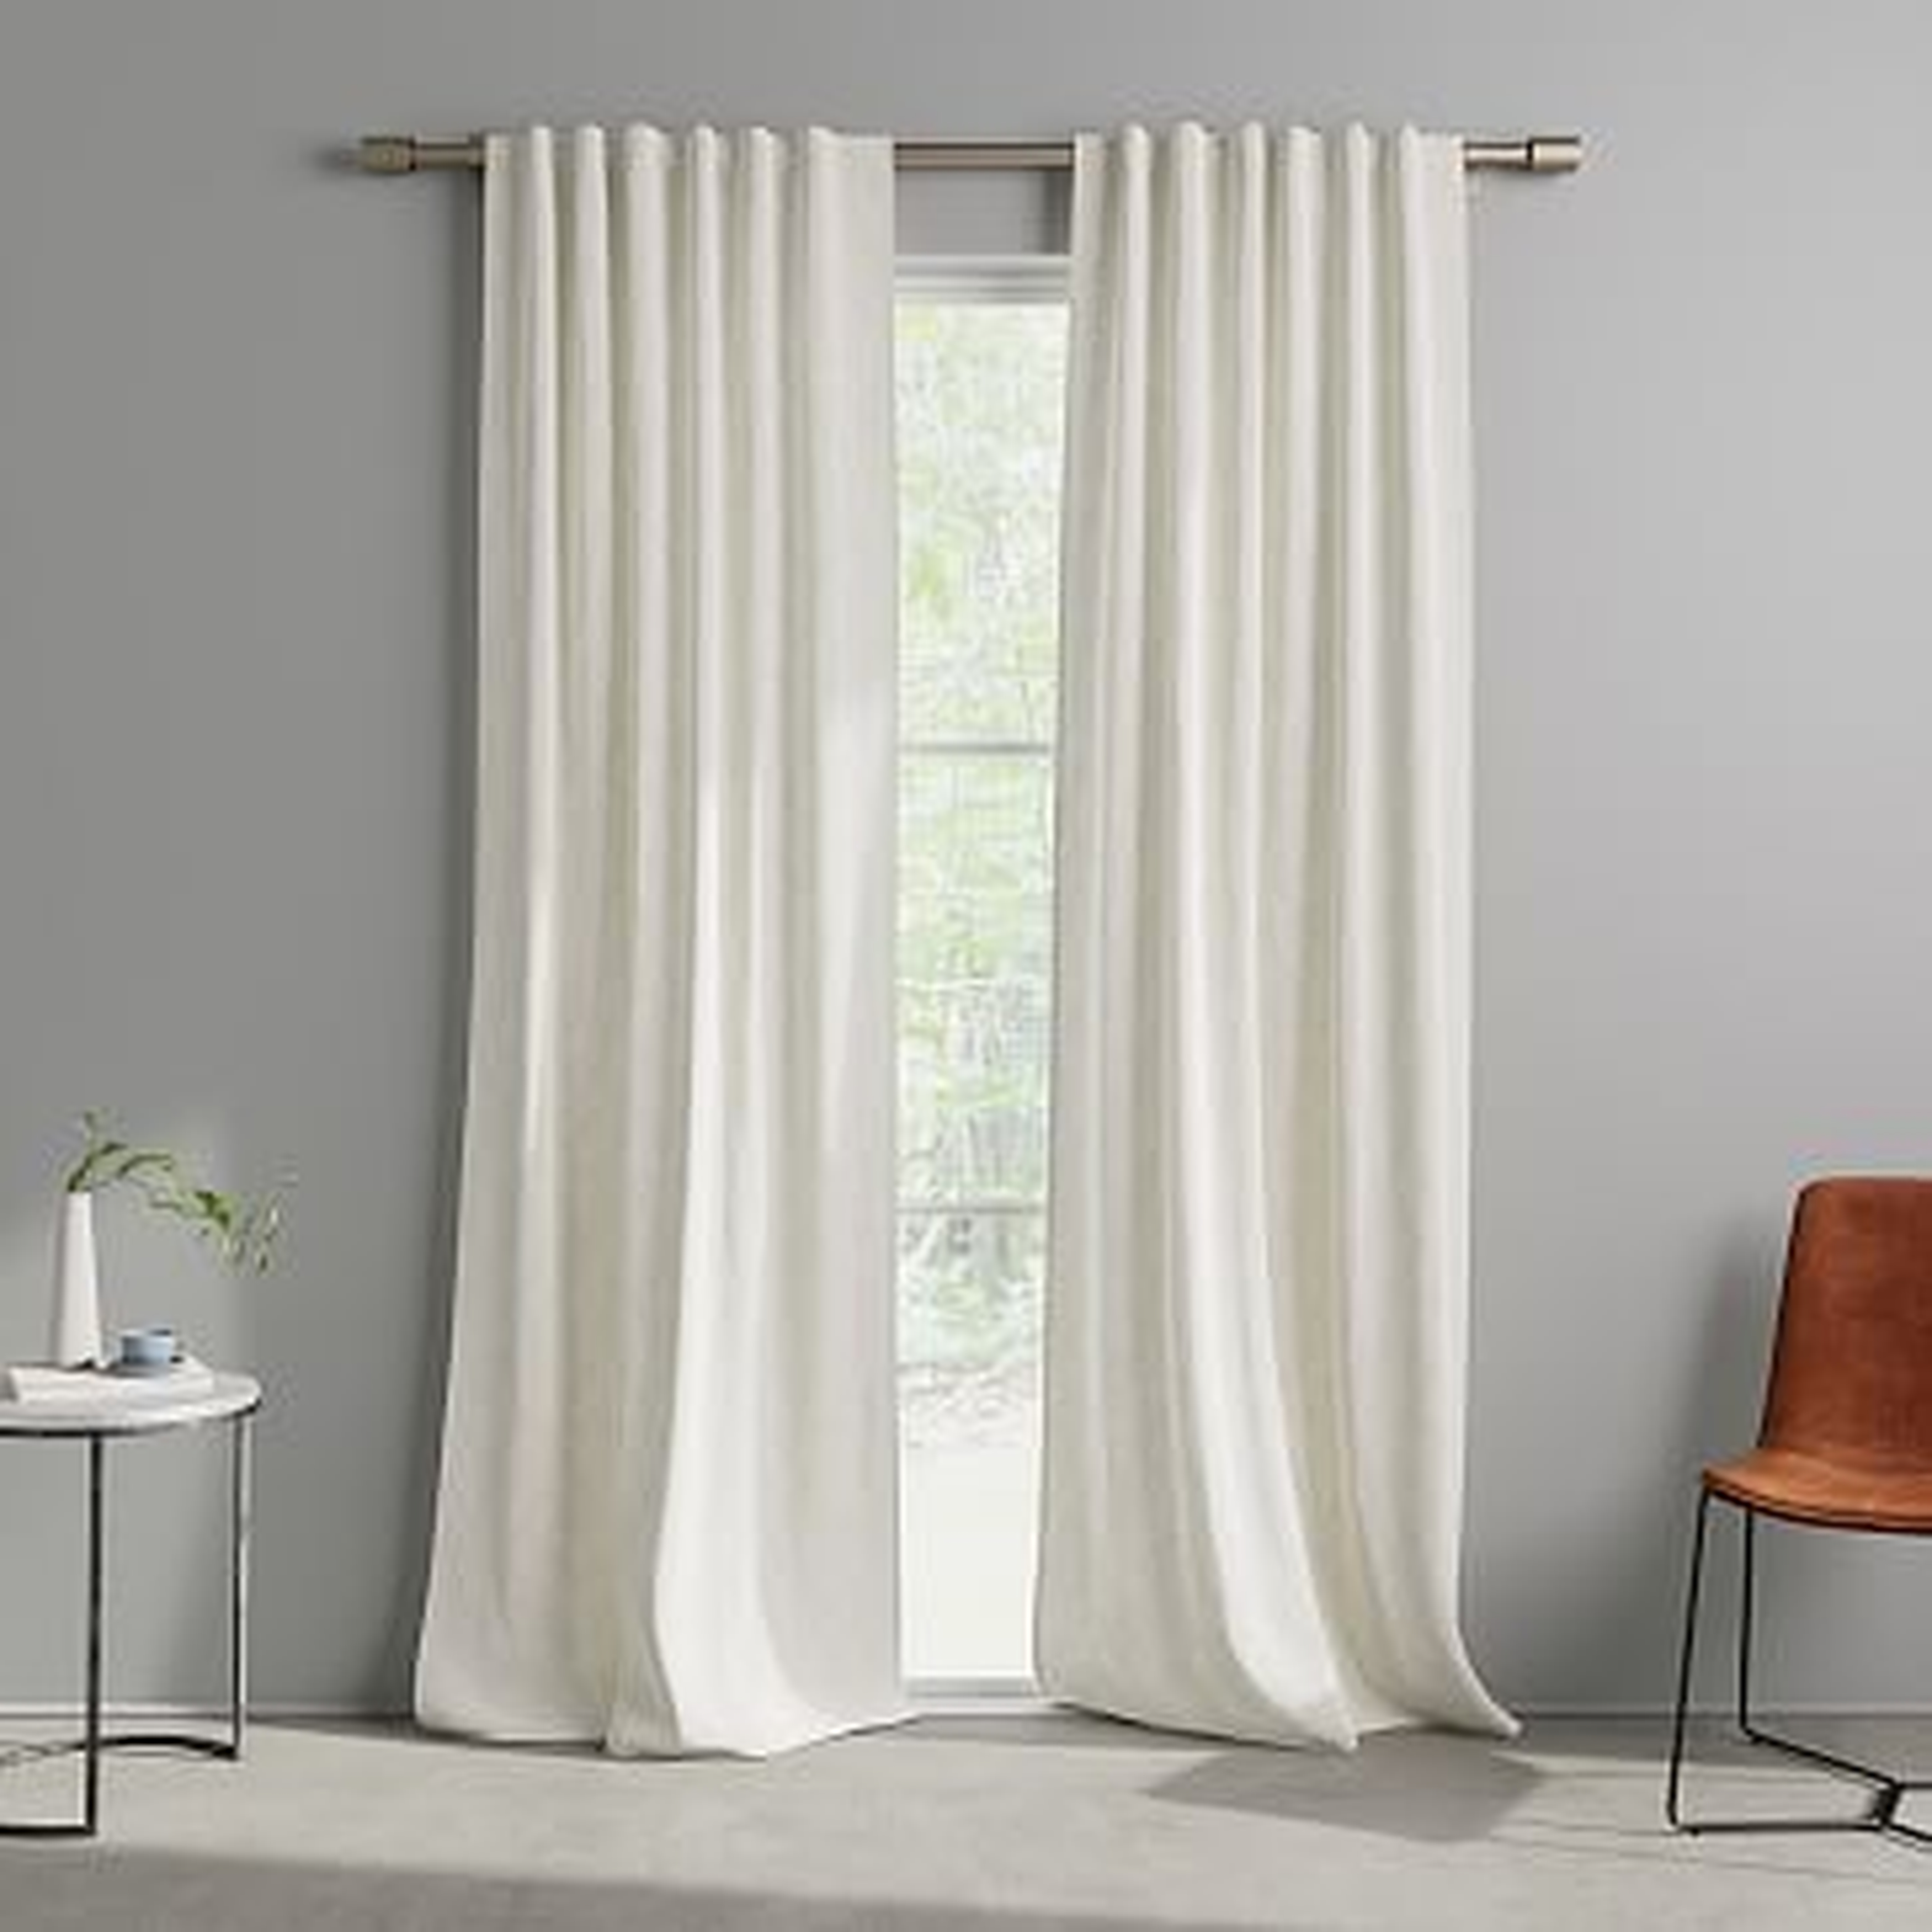 Cotton Canvas Fragmented Lines Curtains (Set of 2), 48"x108", Frost Gray - West Elm